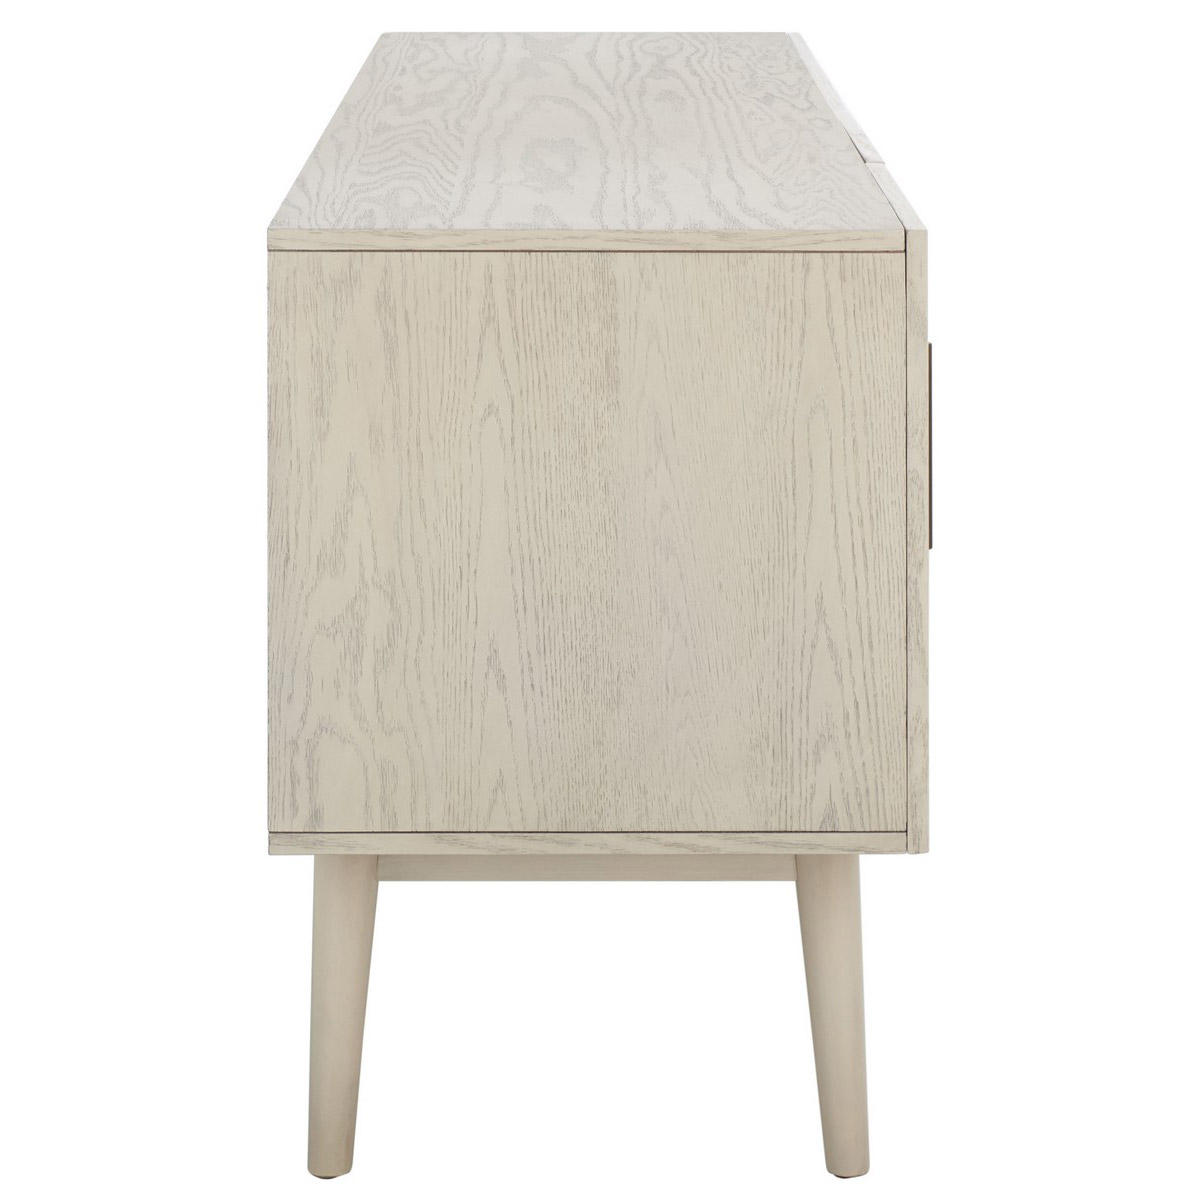 Doderick Mid-Century Media Stand in White Wash by Safavieh